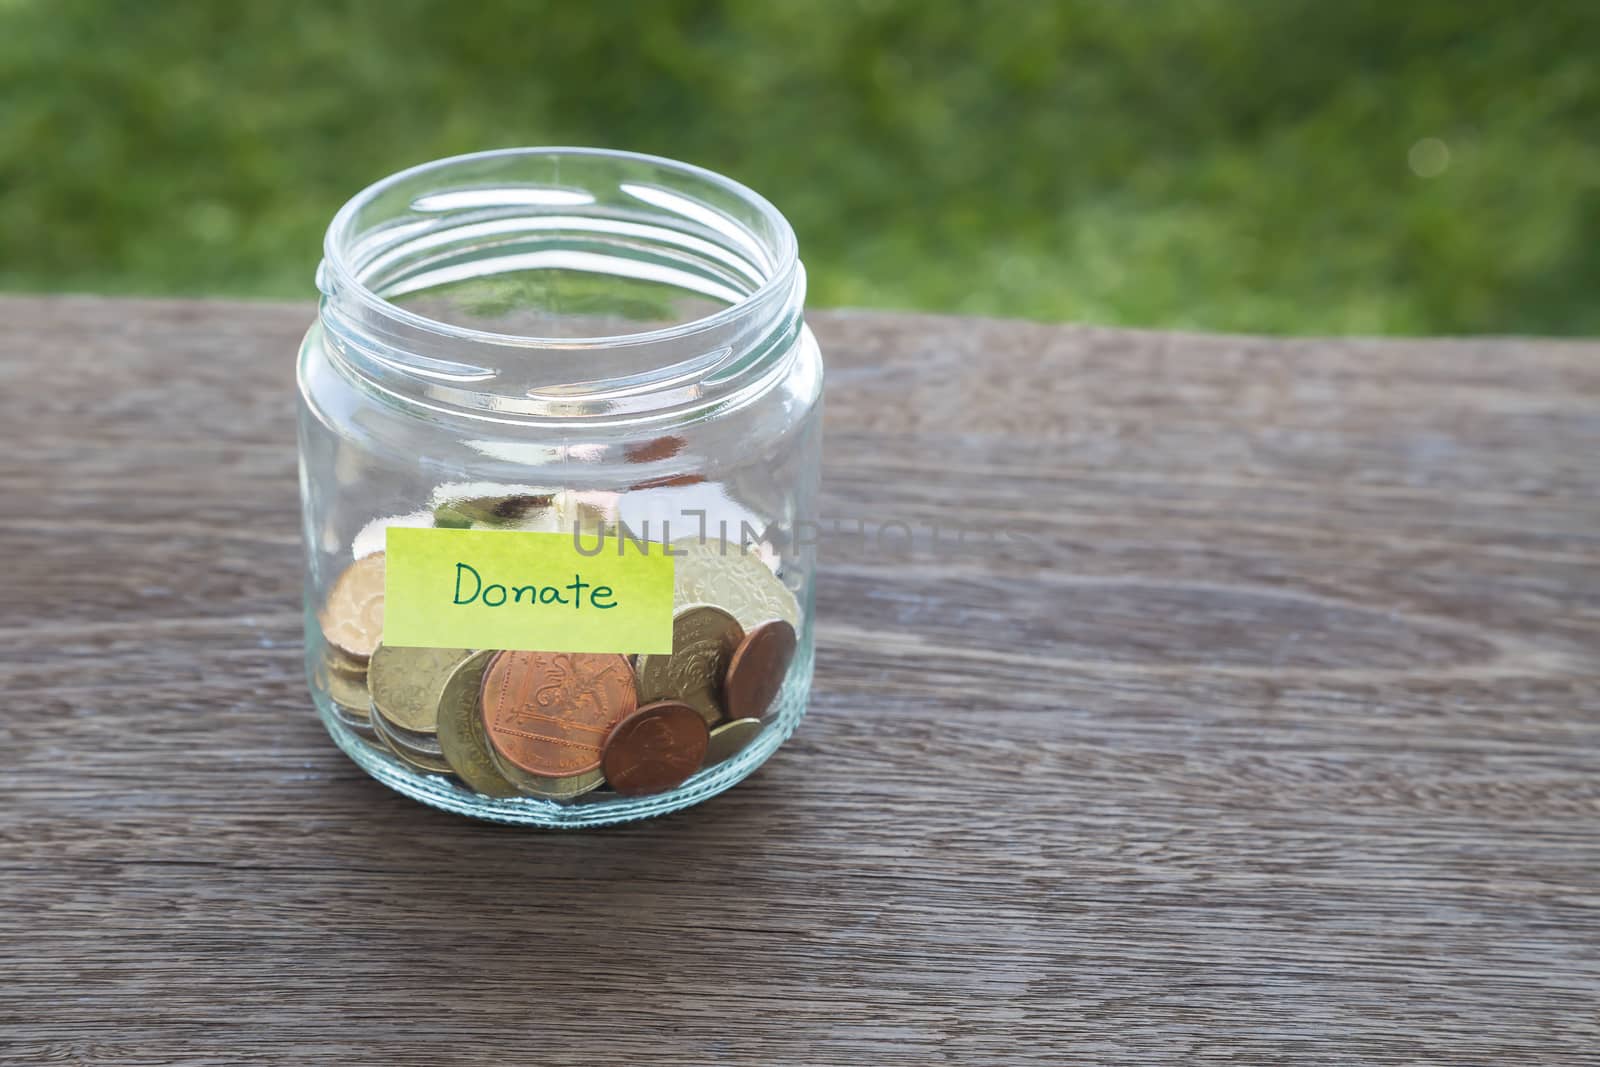 World coins in money glass jar with DONATE word label place on natural wood table, blank space for text